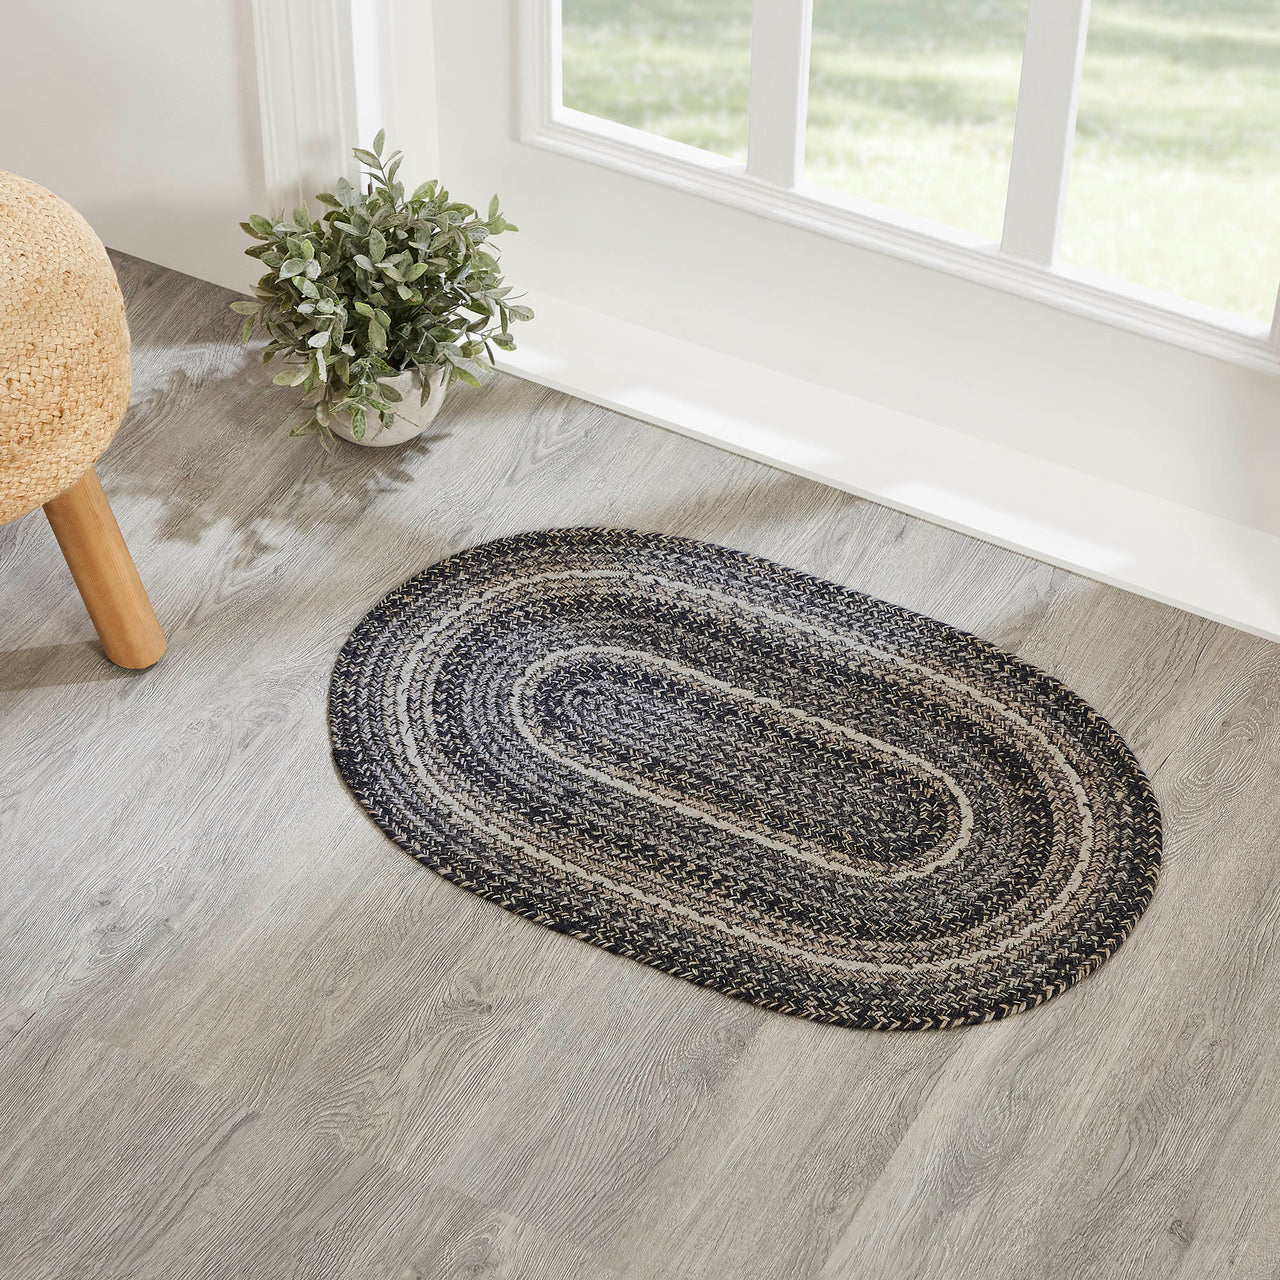 Sawyer Mill Black White Jute Braided Oval Rug with Rug Pad 20x30" VHC Brands